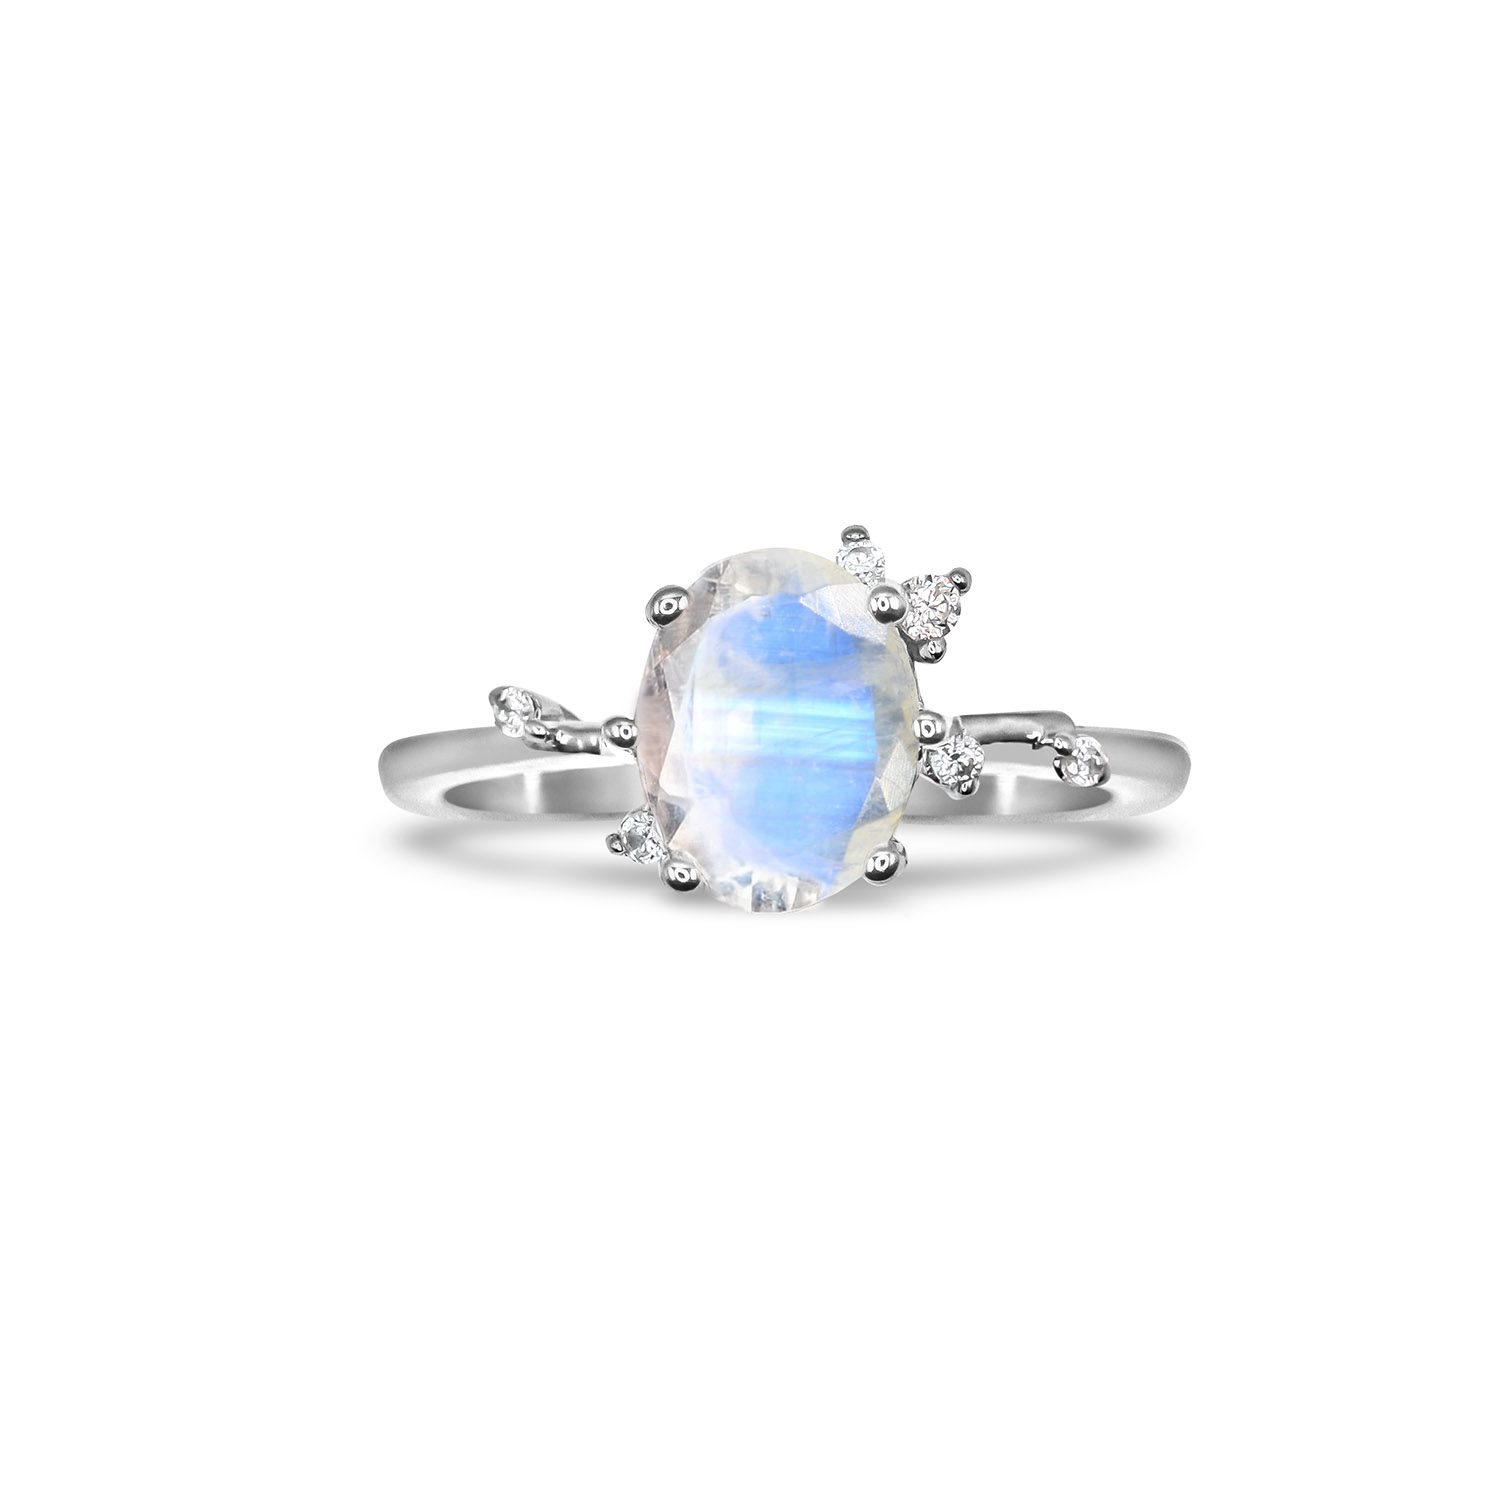 Jewellery Rings Solitaire Rings Silver Moonstone Ring • 925 Sterling Silver • Natural Stone Ring • Moonstone Ring • Moonstone Gemstone • June Birthstone • Solitaire Ring • 